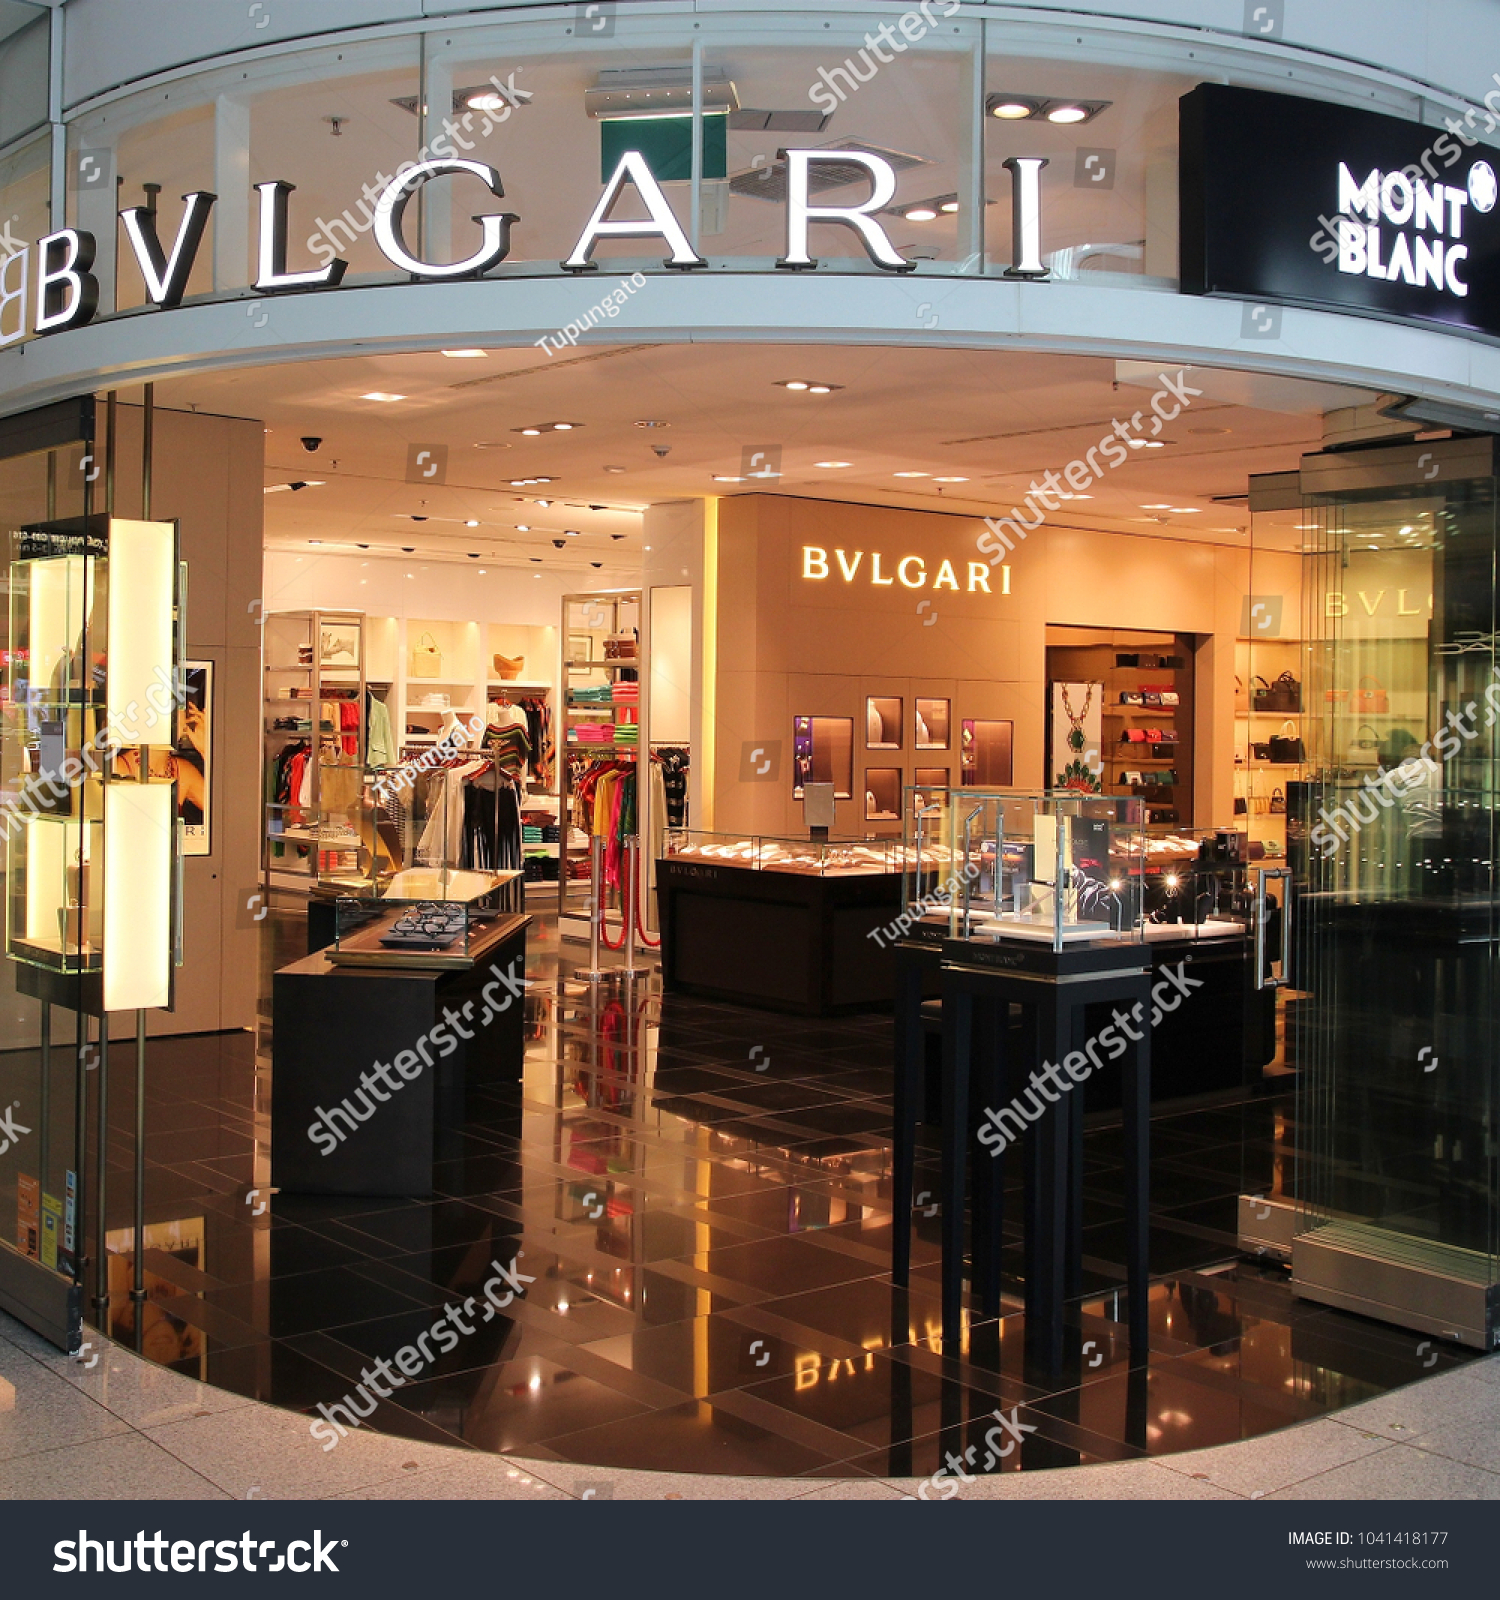 bvlgari outlet germany